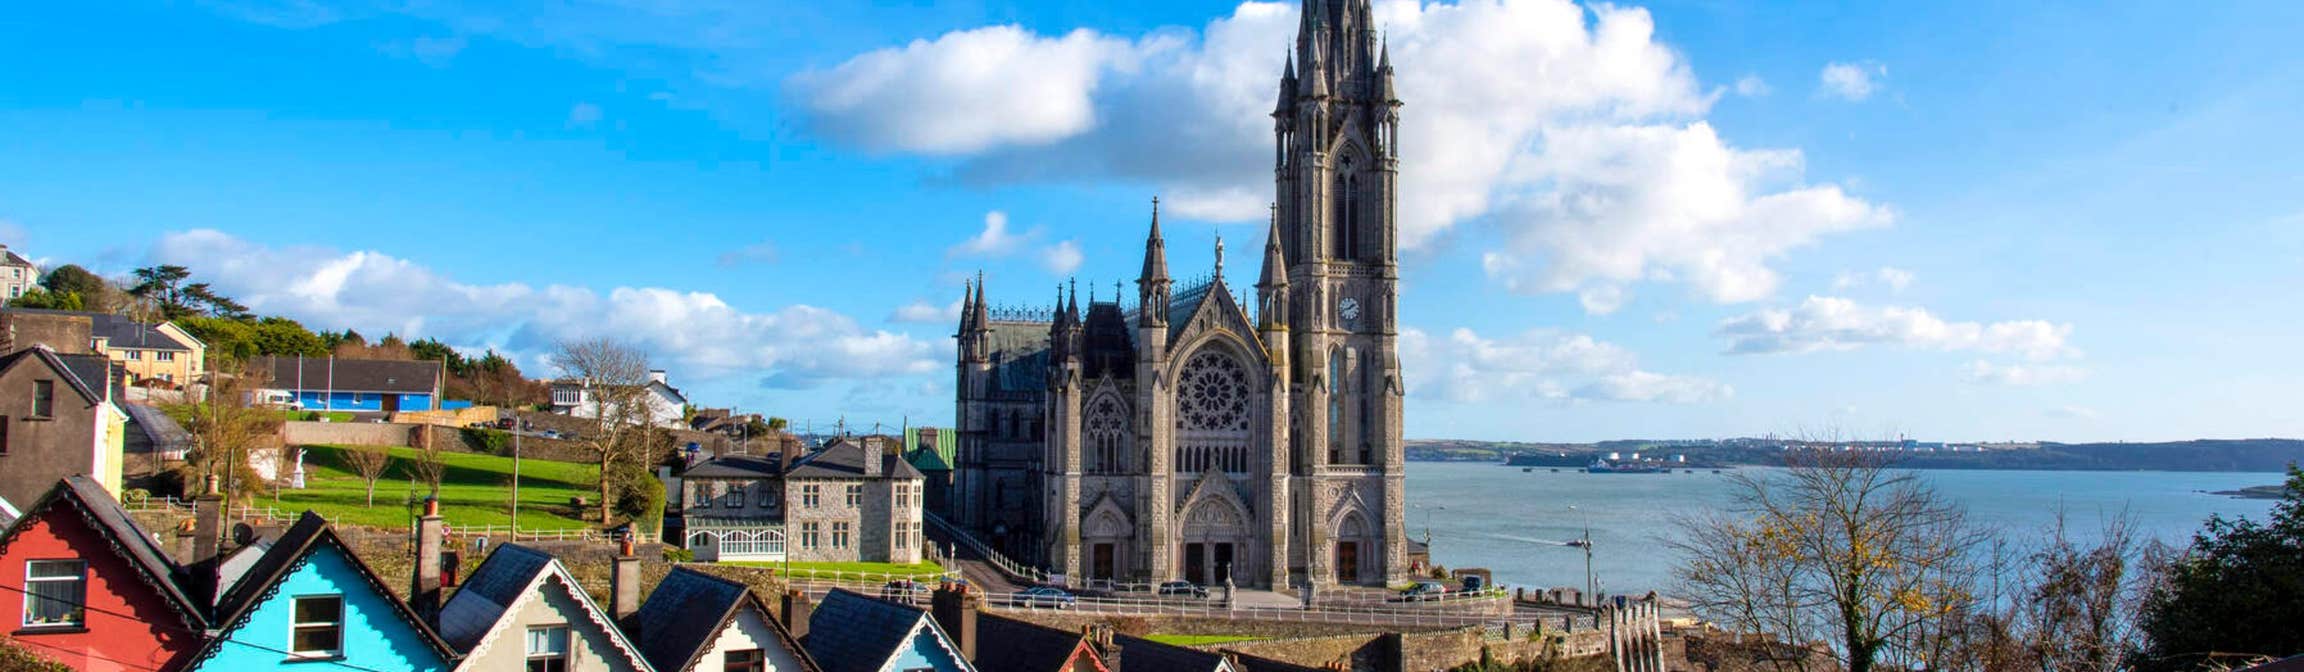 Colourful buildings in front of a church by the sea in Cobh, County Cork